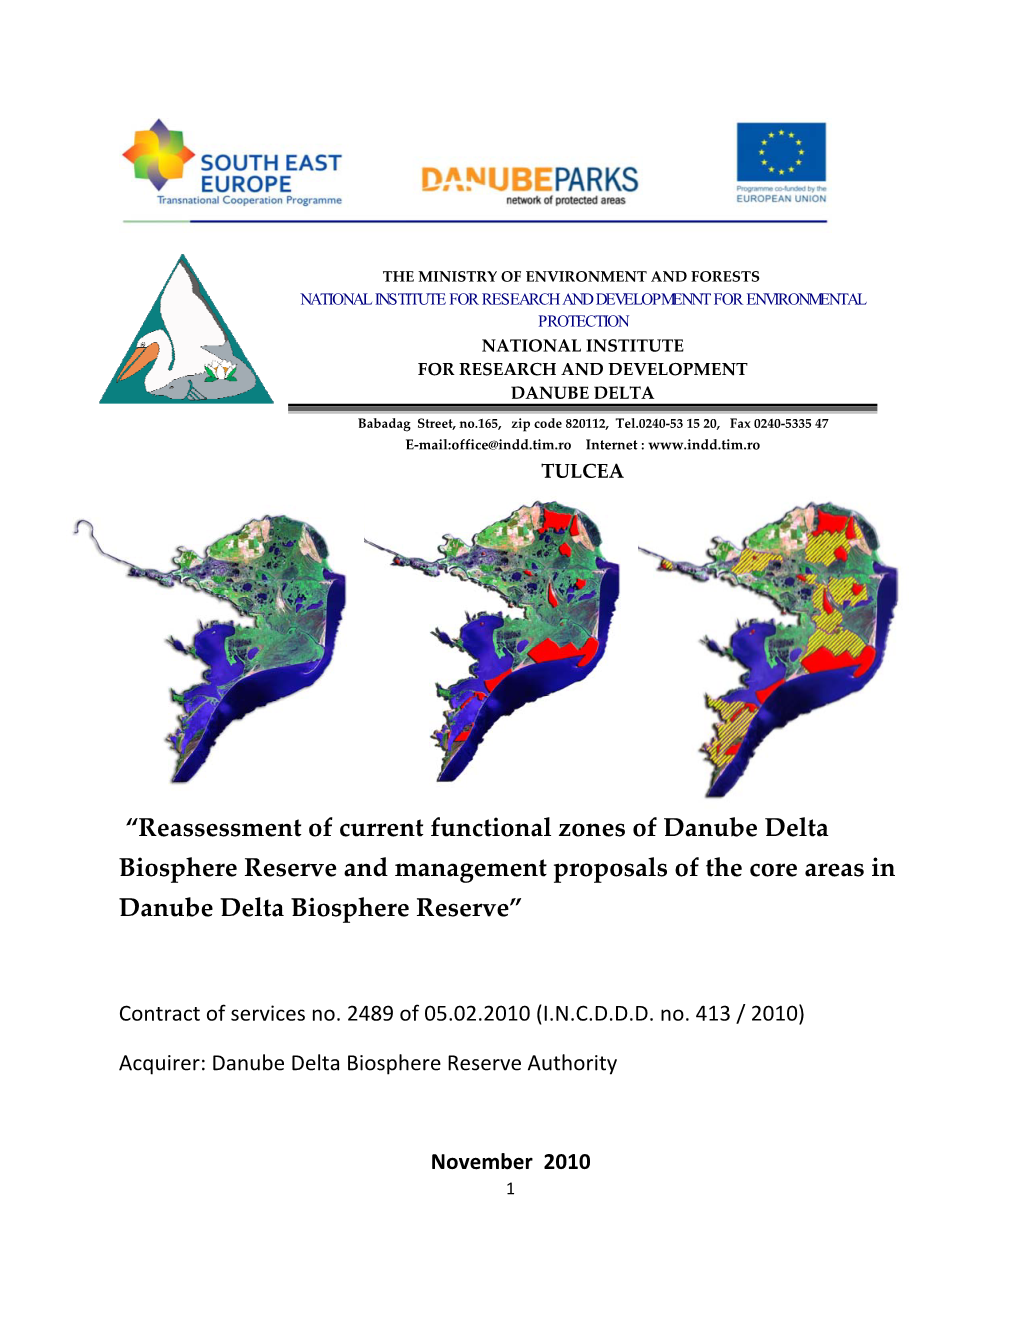 Reassessment of Current Functional Zones of Danube Delta Biosphere Reserve and Management Proposals of the Core Areas in Danube Delta Biosphere Reserve”